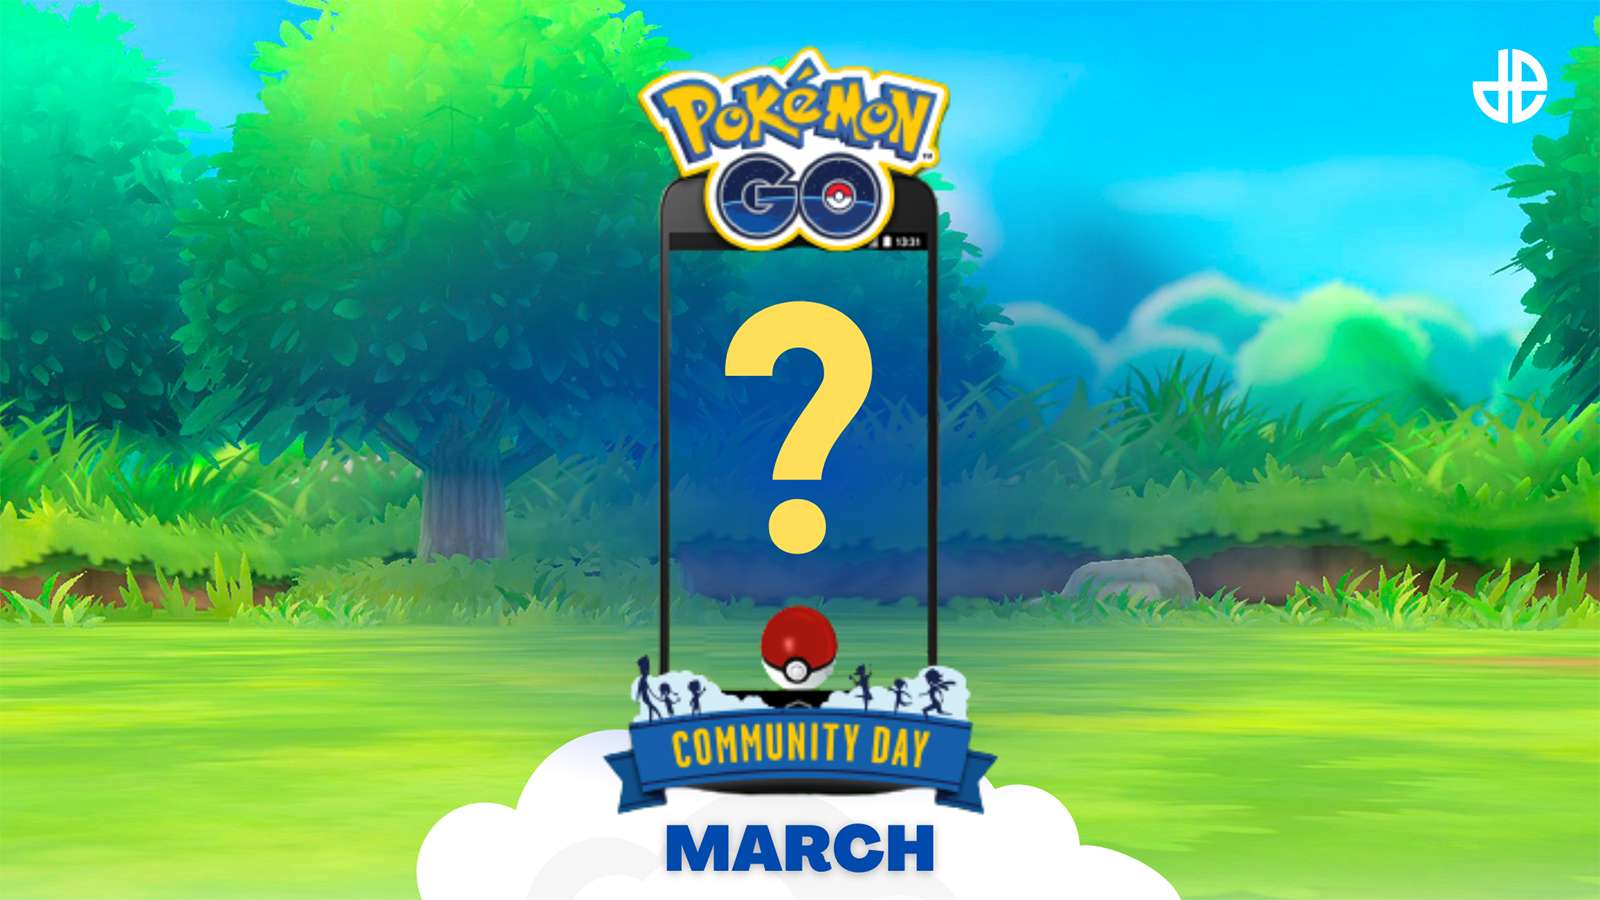 A poster for the Pokemon Go March Community Day